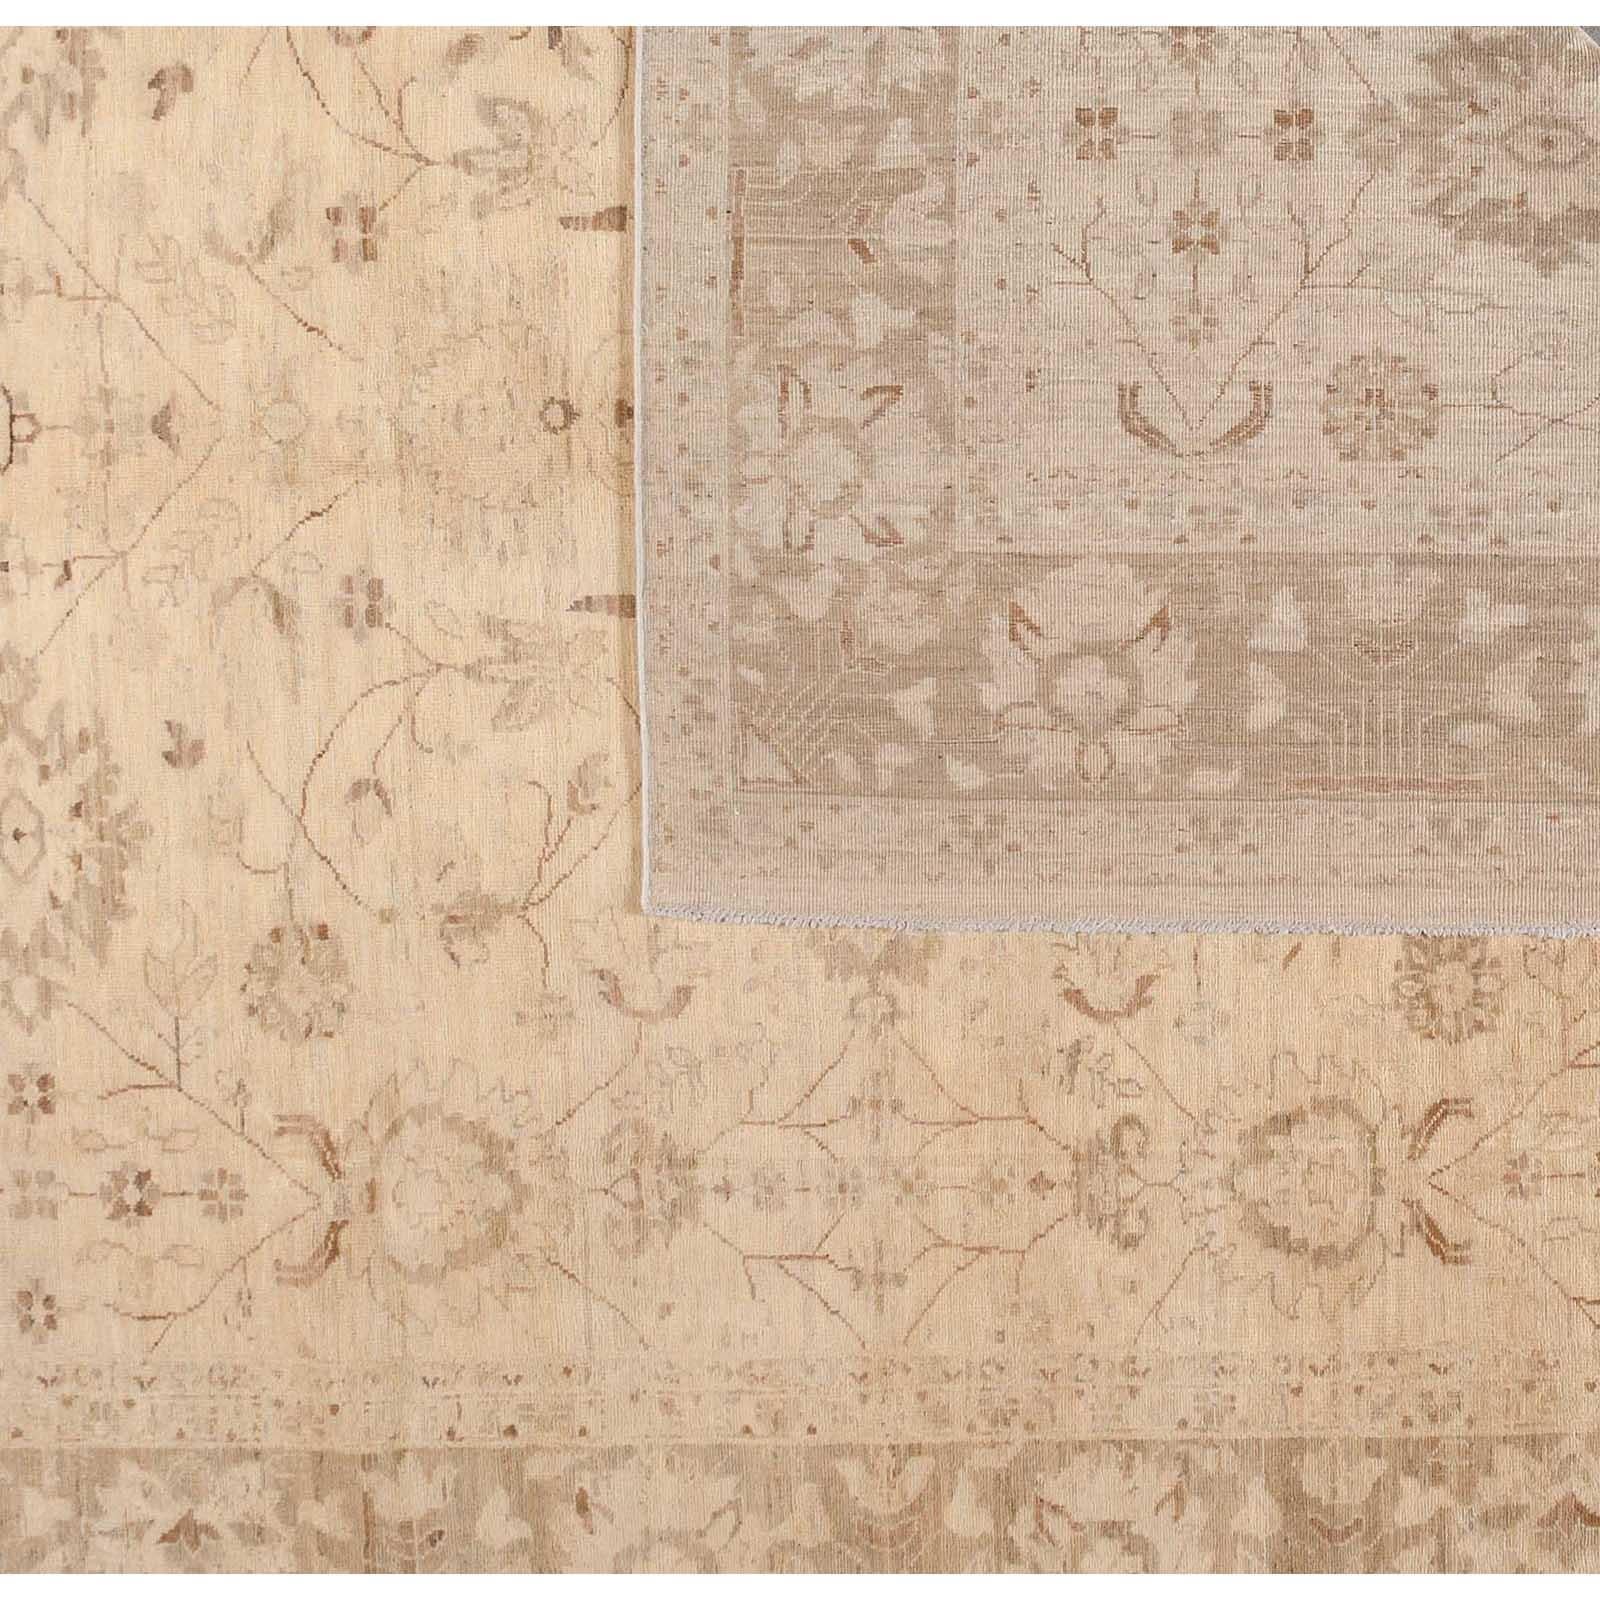 Neutral beige tones and a delicate floral design make for a very versatile rug that can unify and complete any space. Wool. Hand knotted in Pakistan using vegetal dyes.